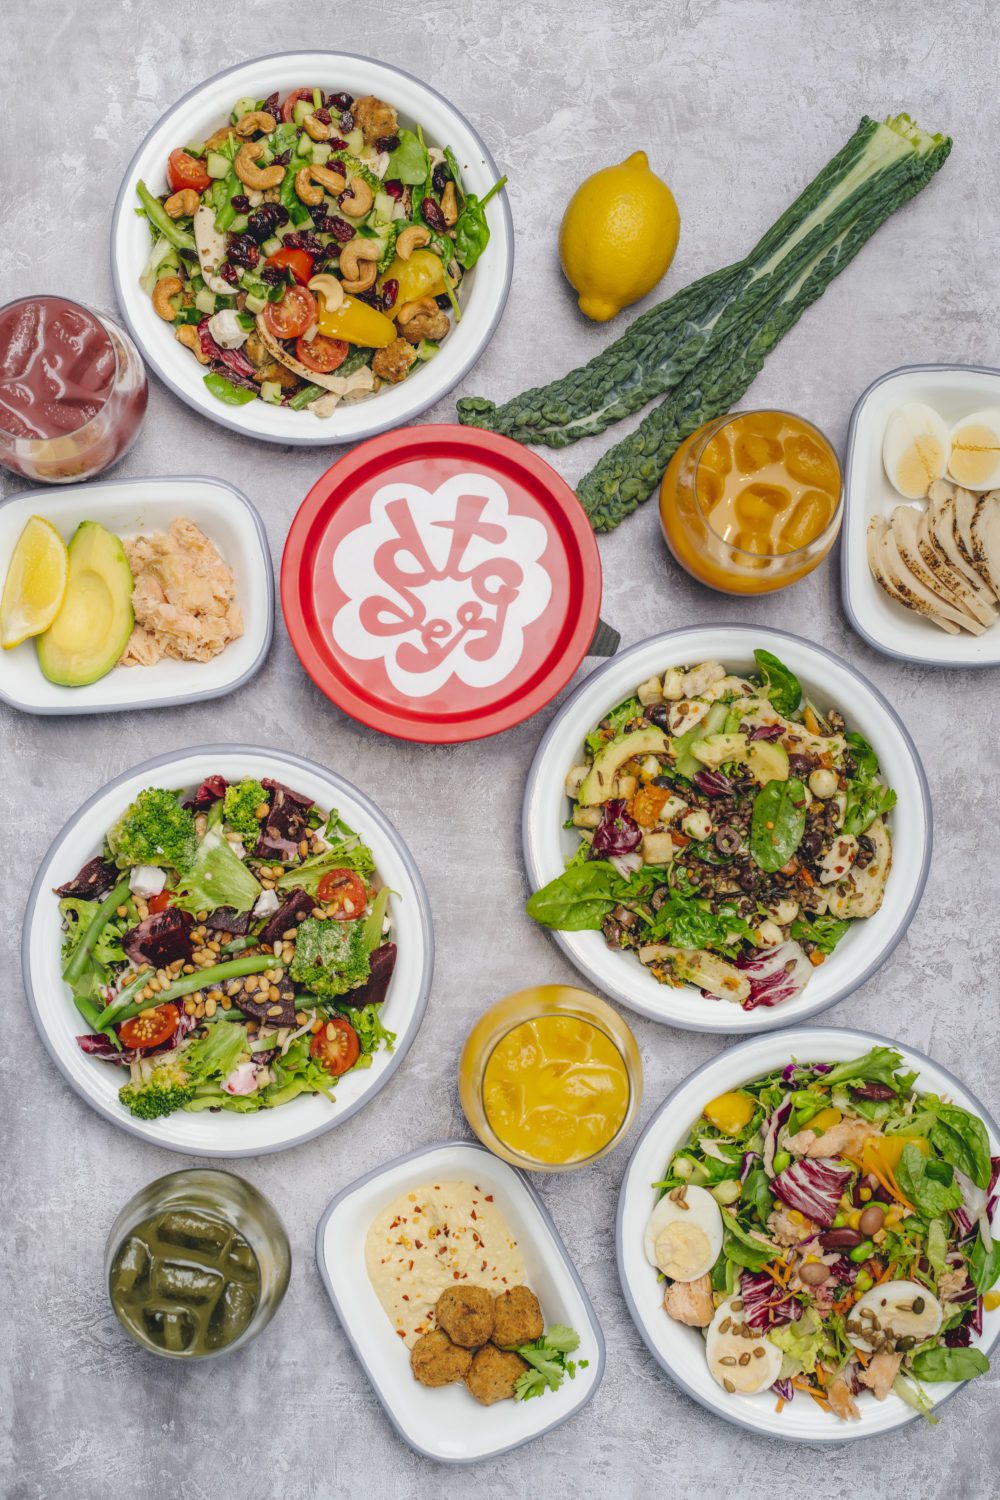 A selection of healthy dishes at Tossed